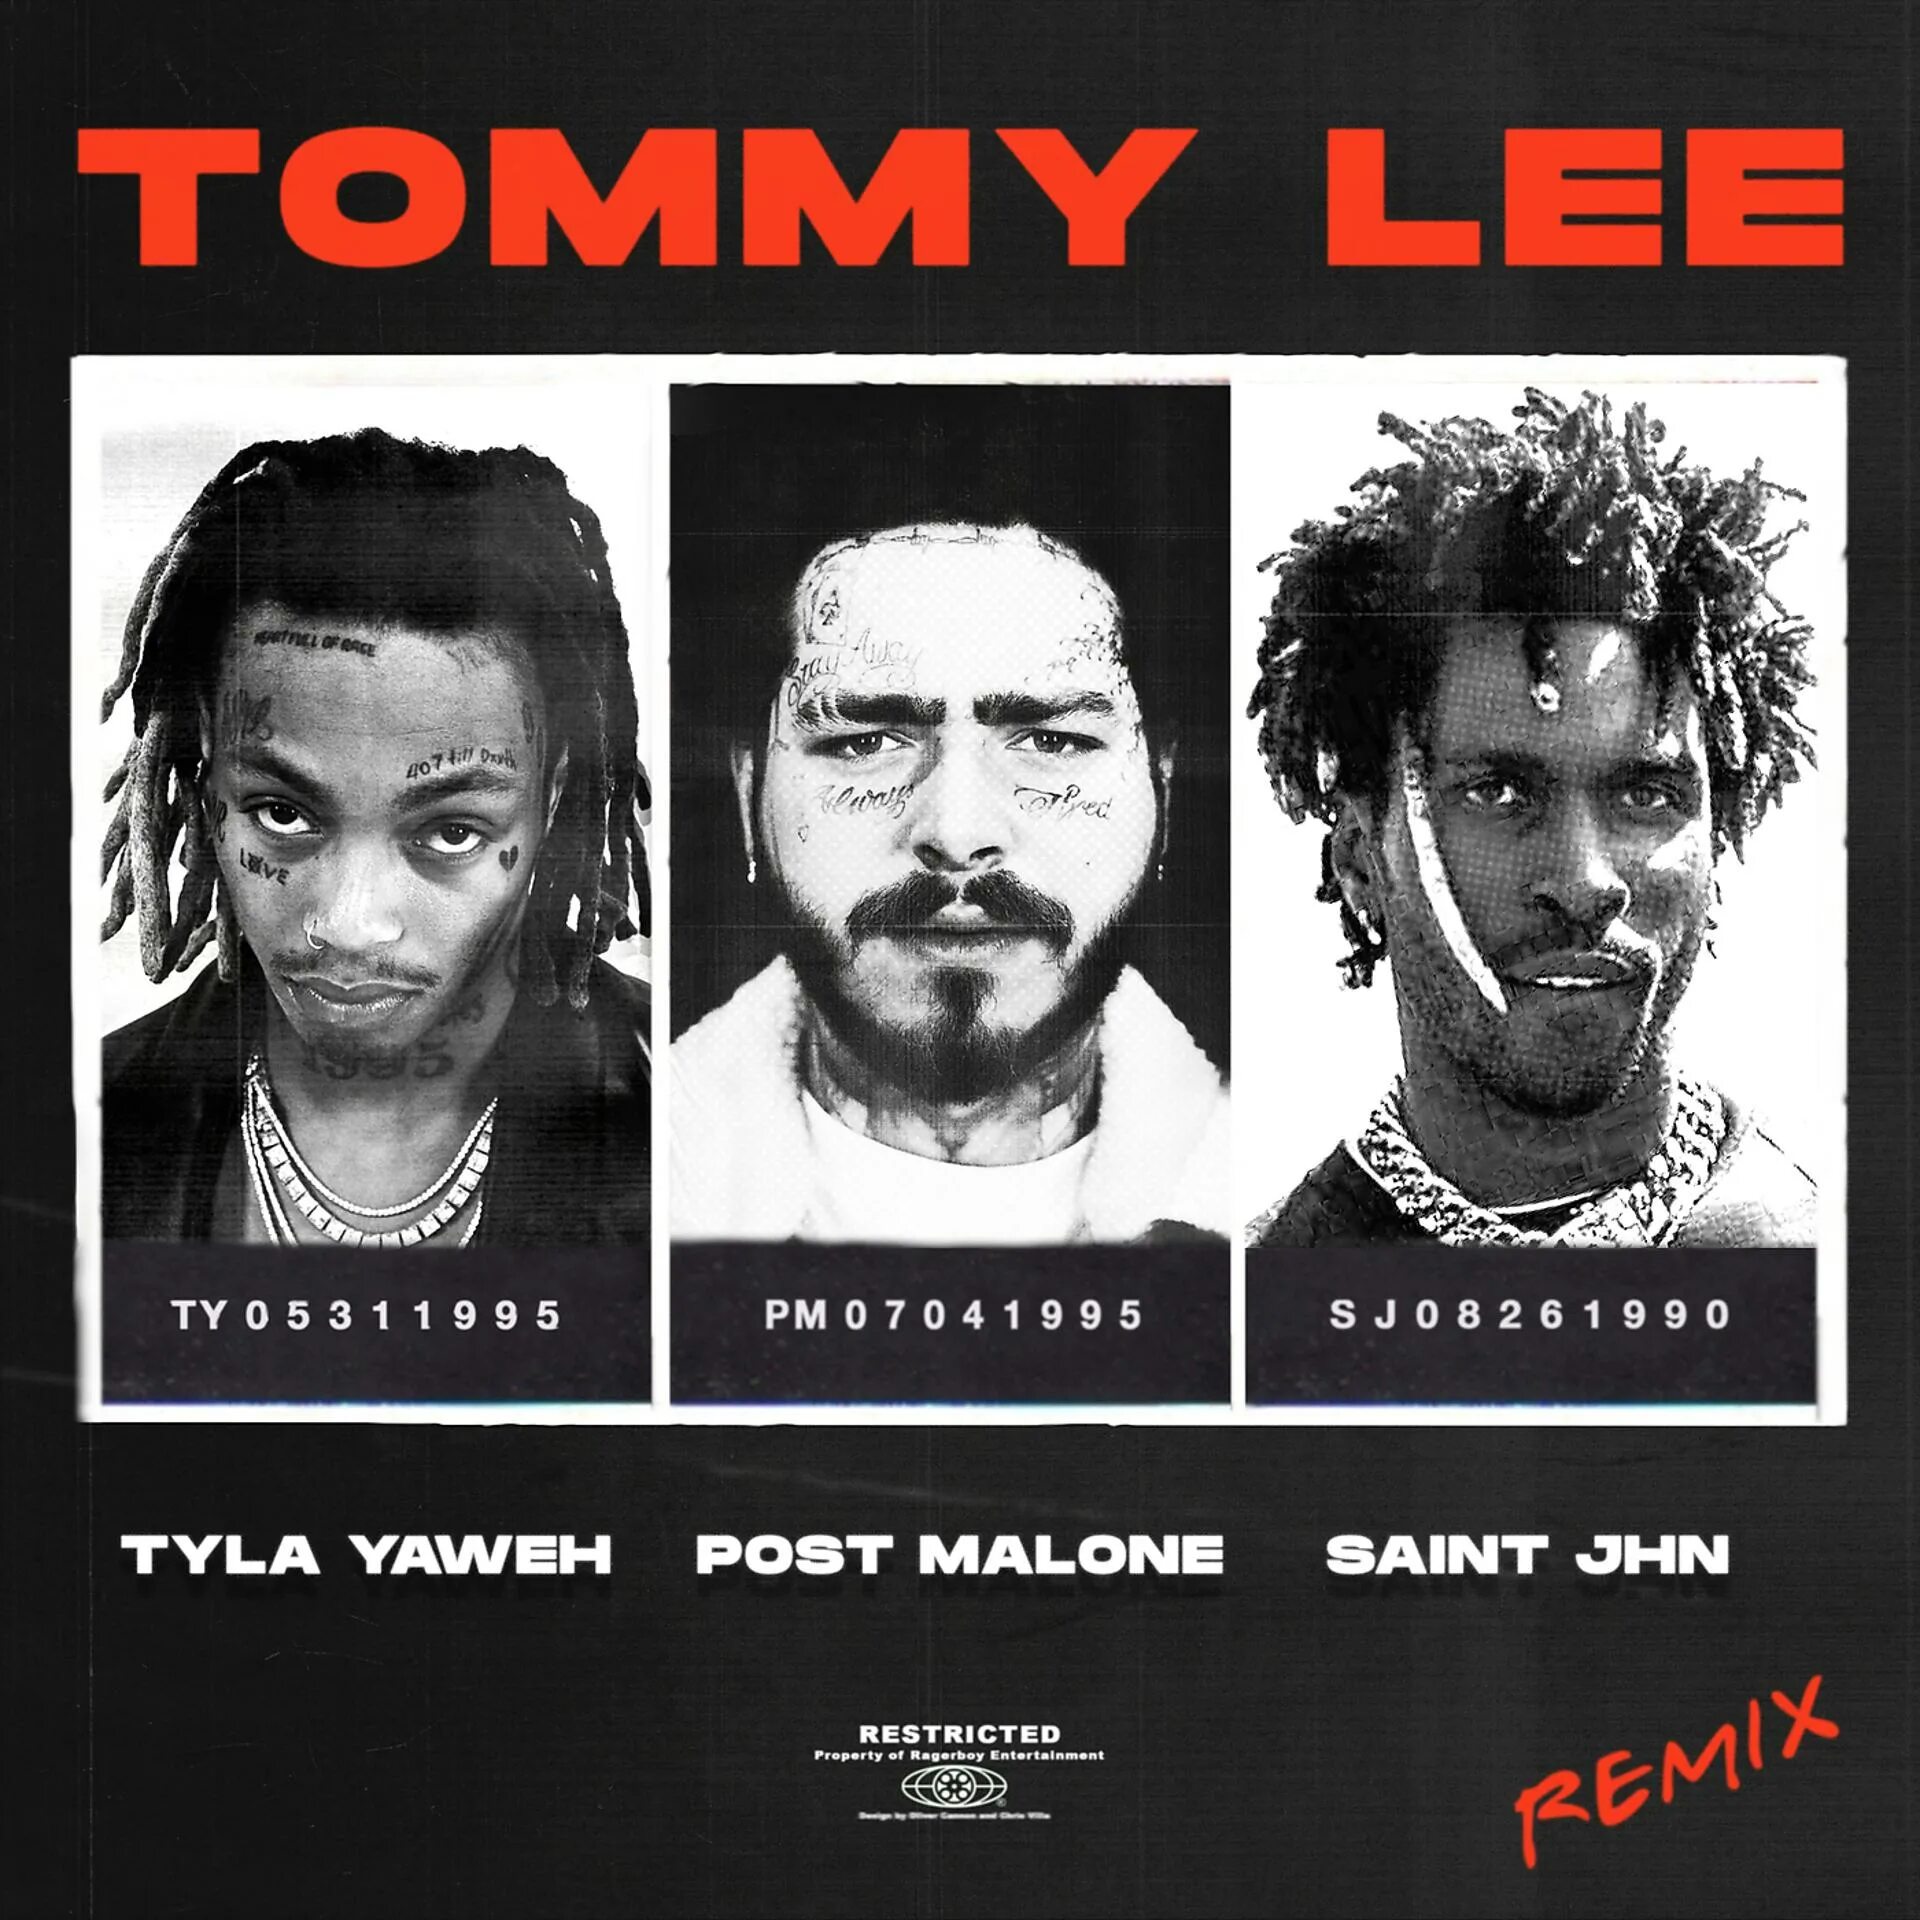 Tommy Lee Post Malone. Post Malone and Tyla Yaweh. Tyla Yaweh Возраст. Post Malone Twelve Carat toothache. Post malone remix